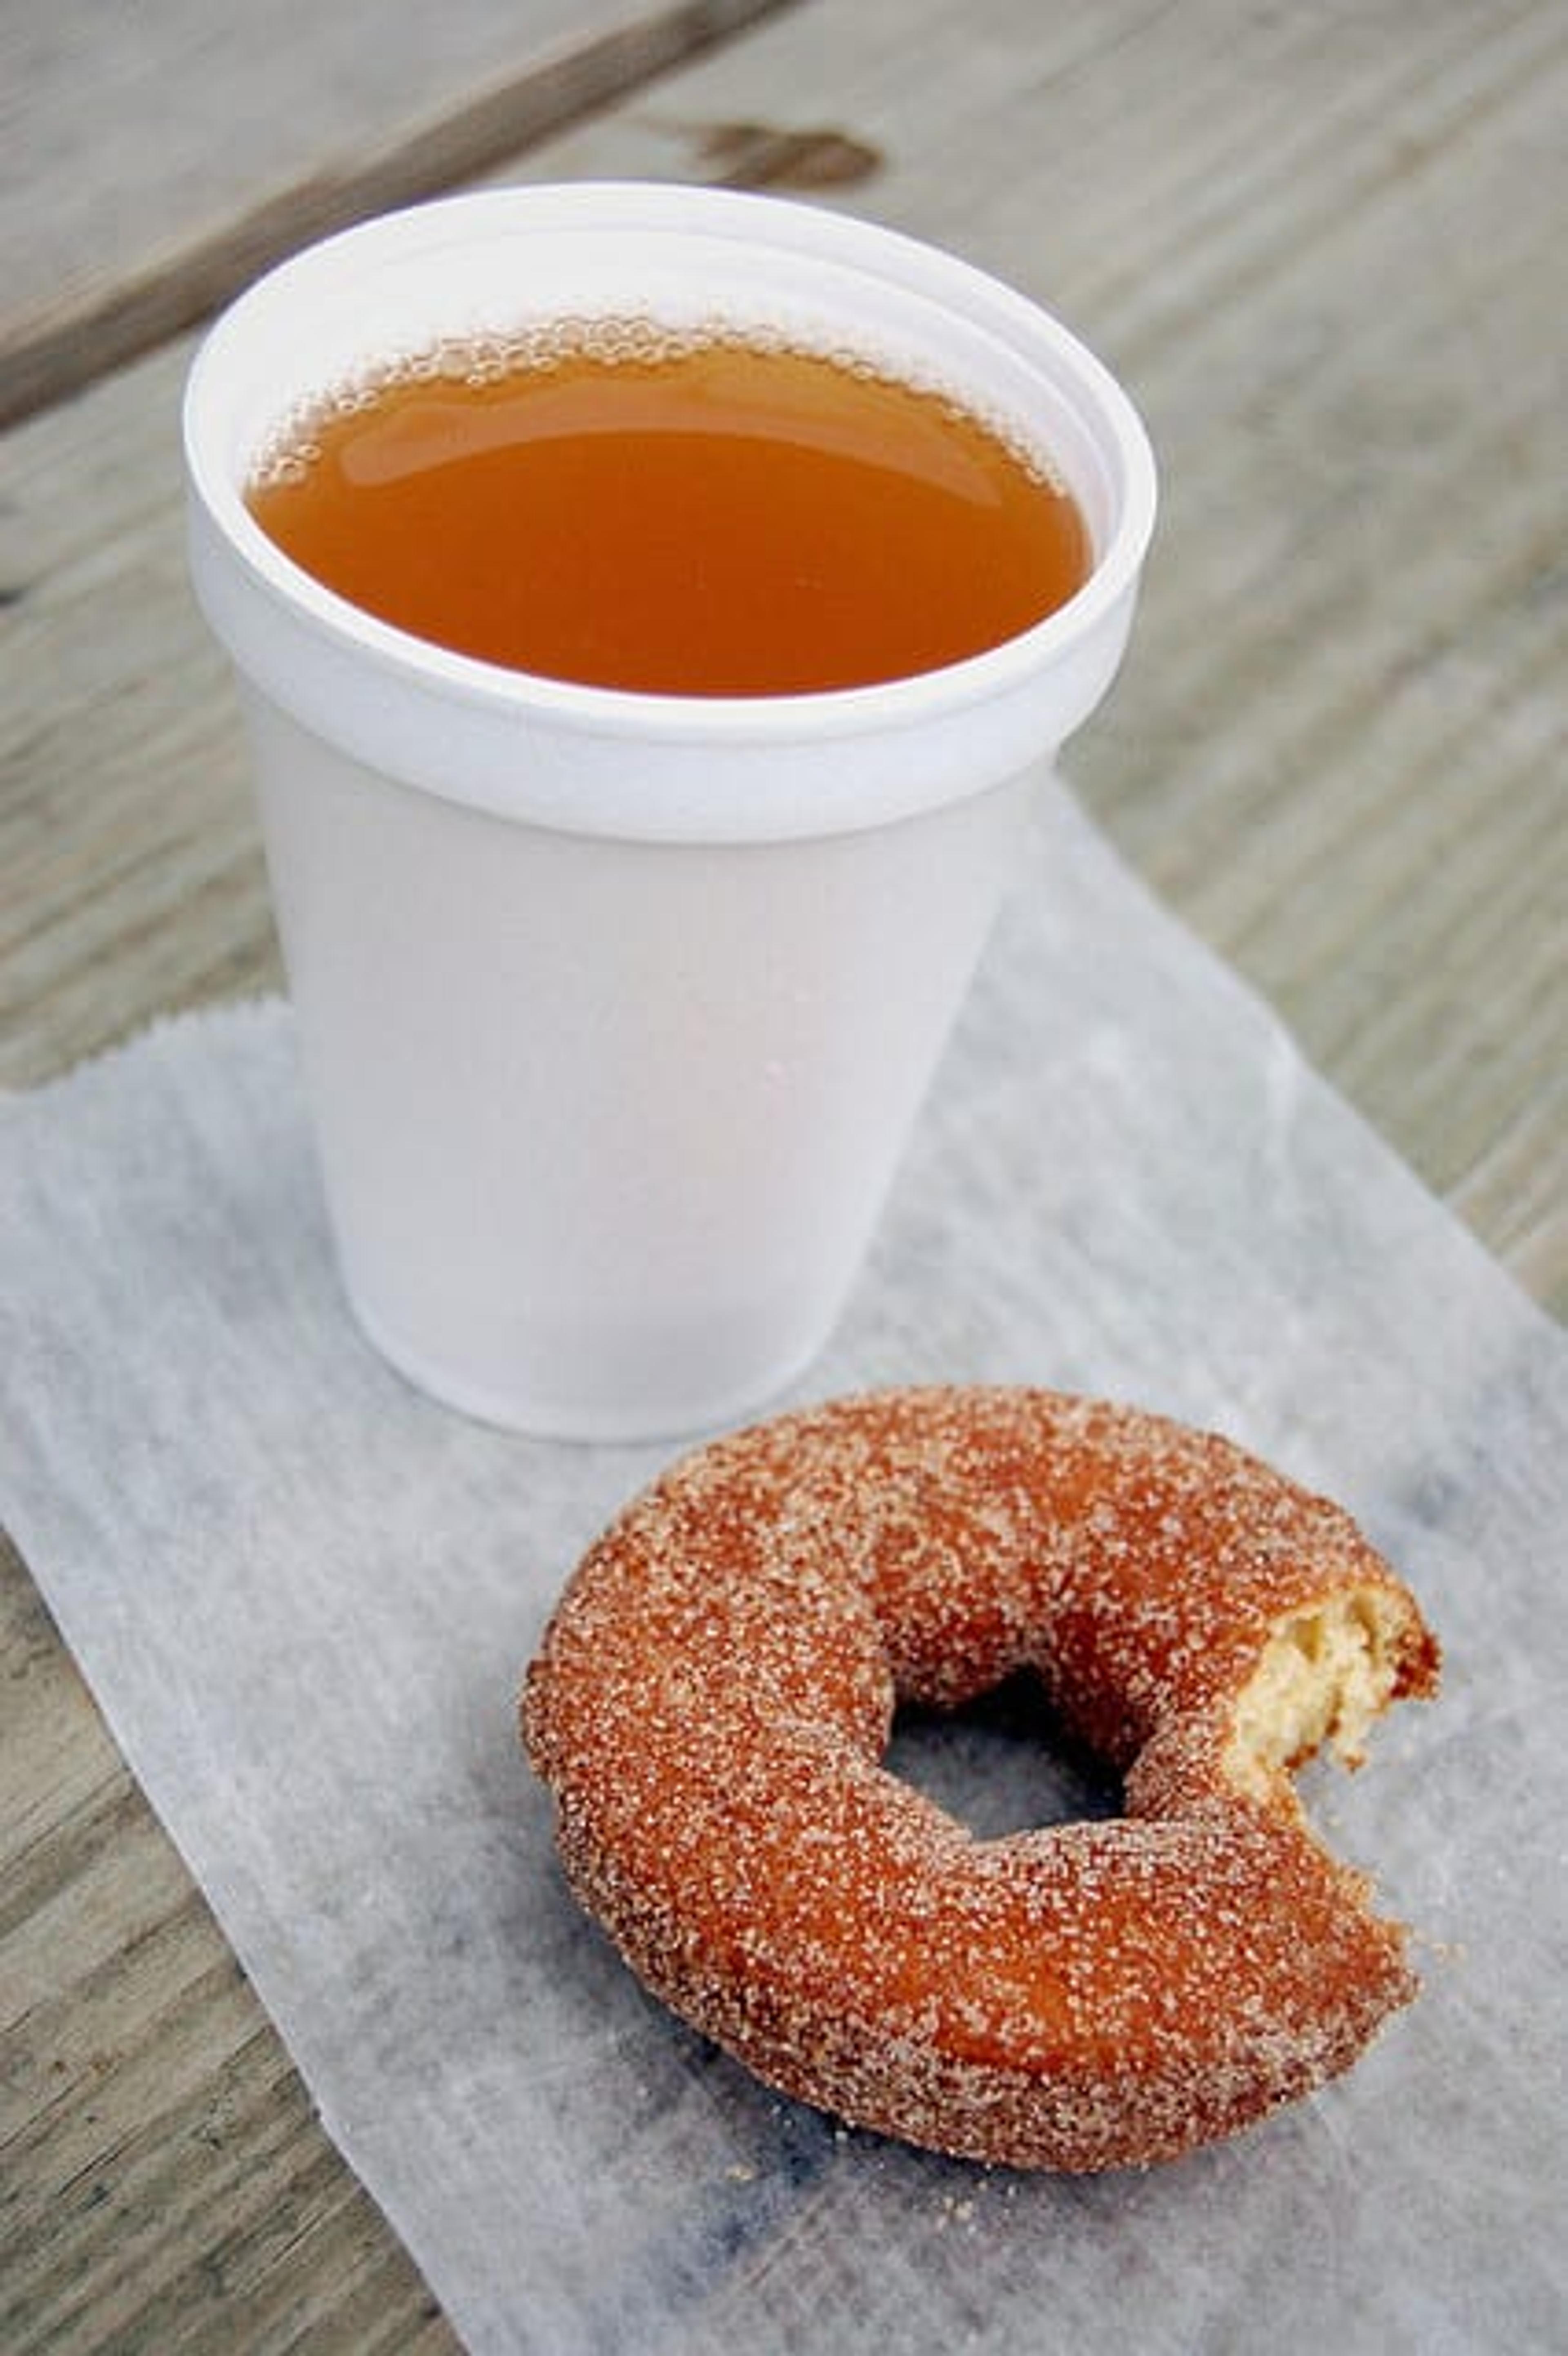 Cider and donuts